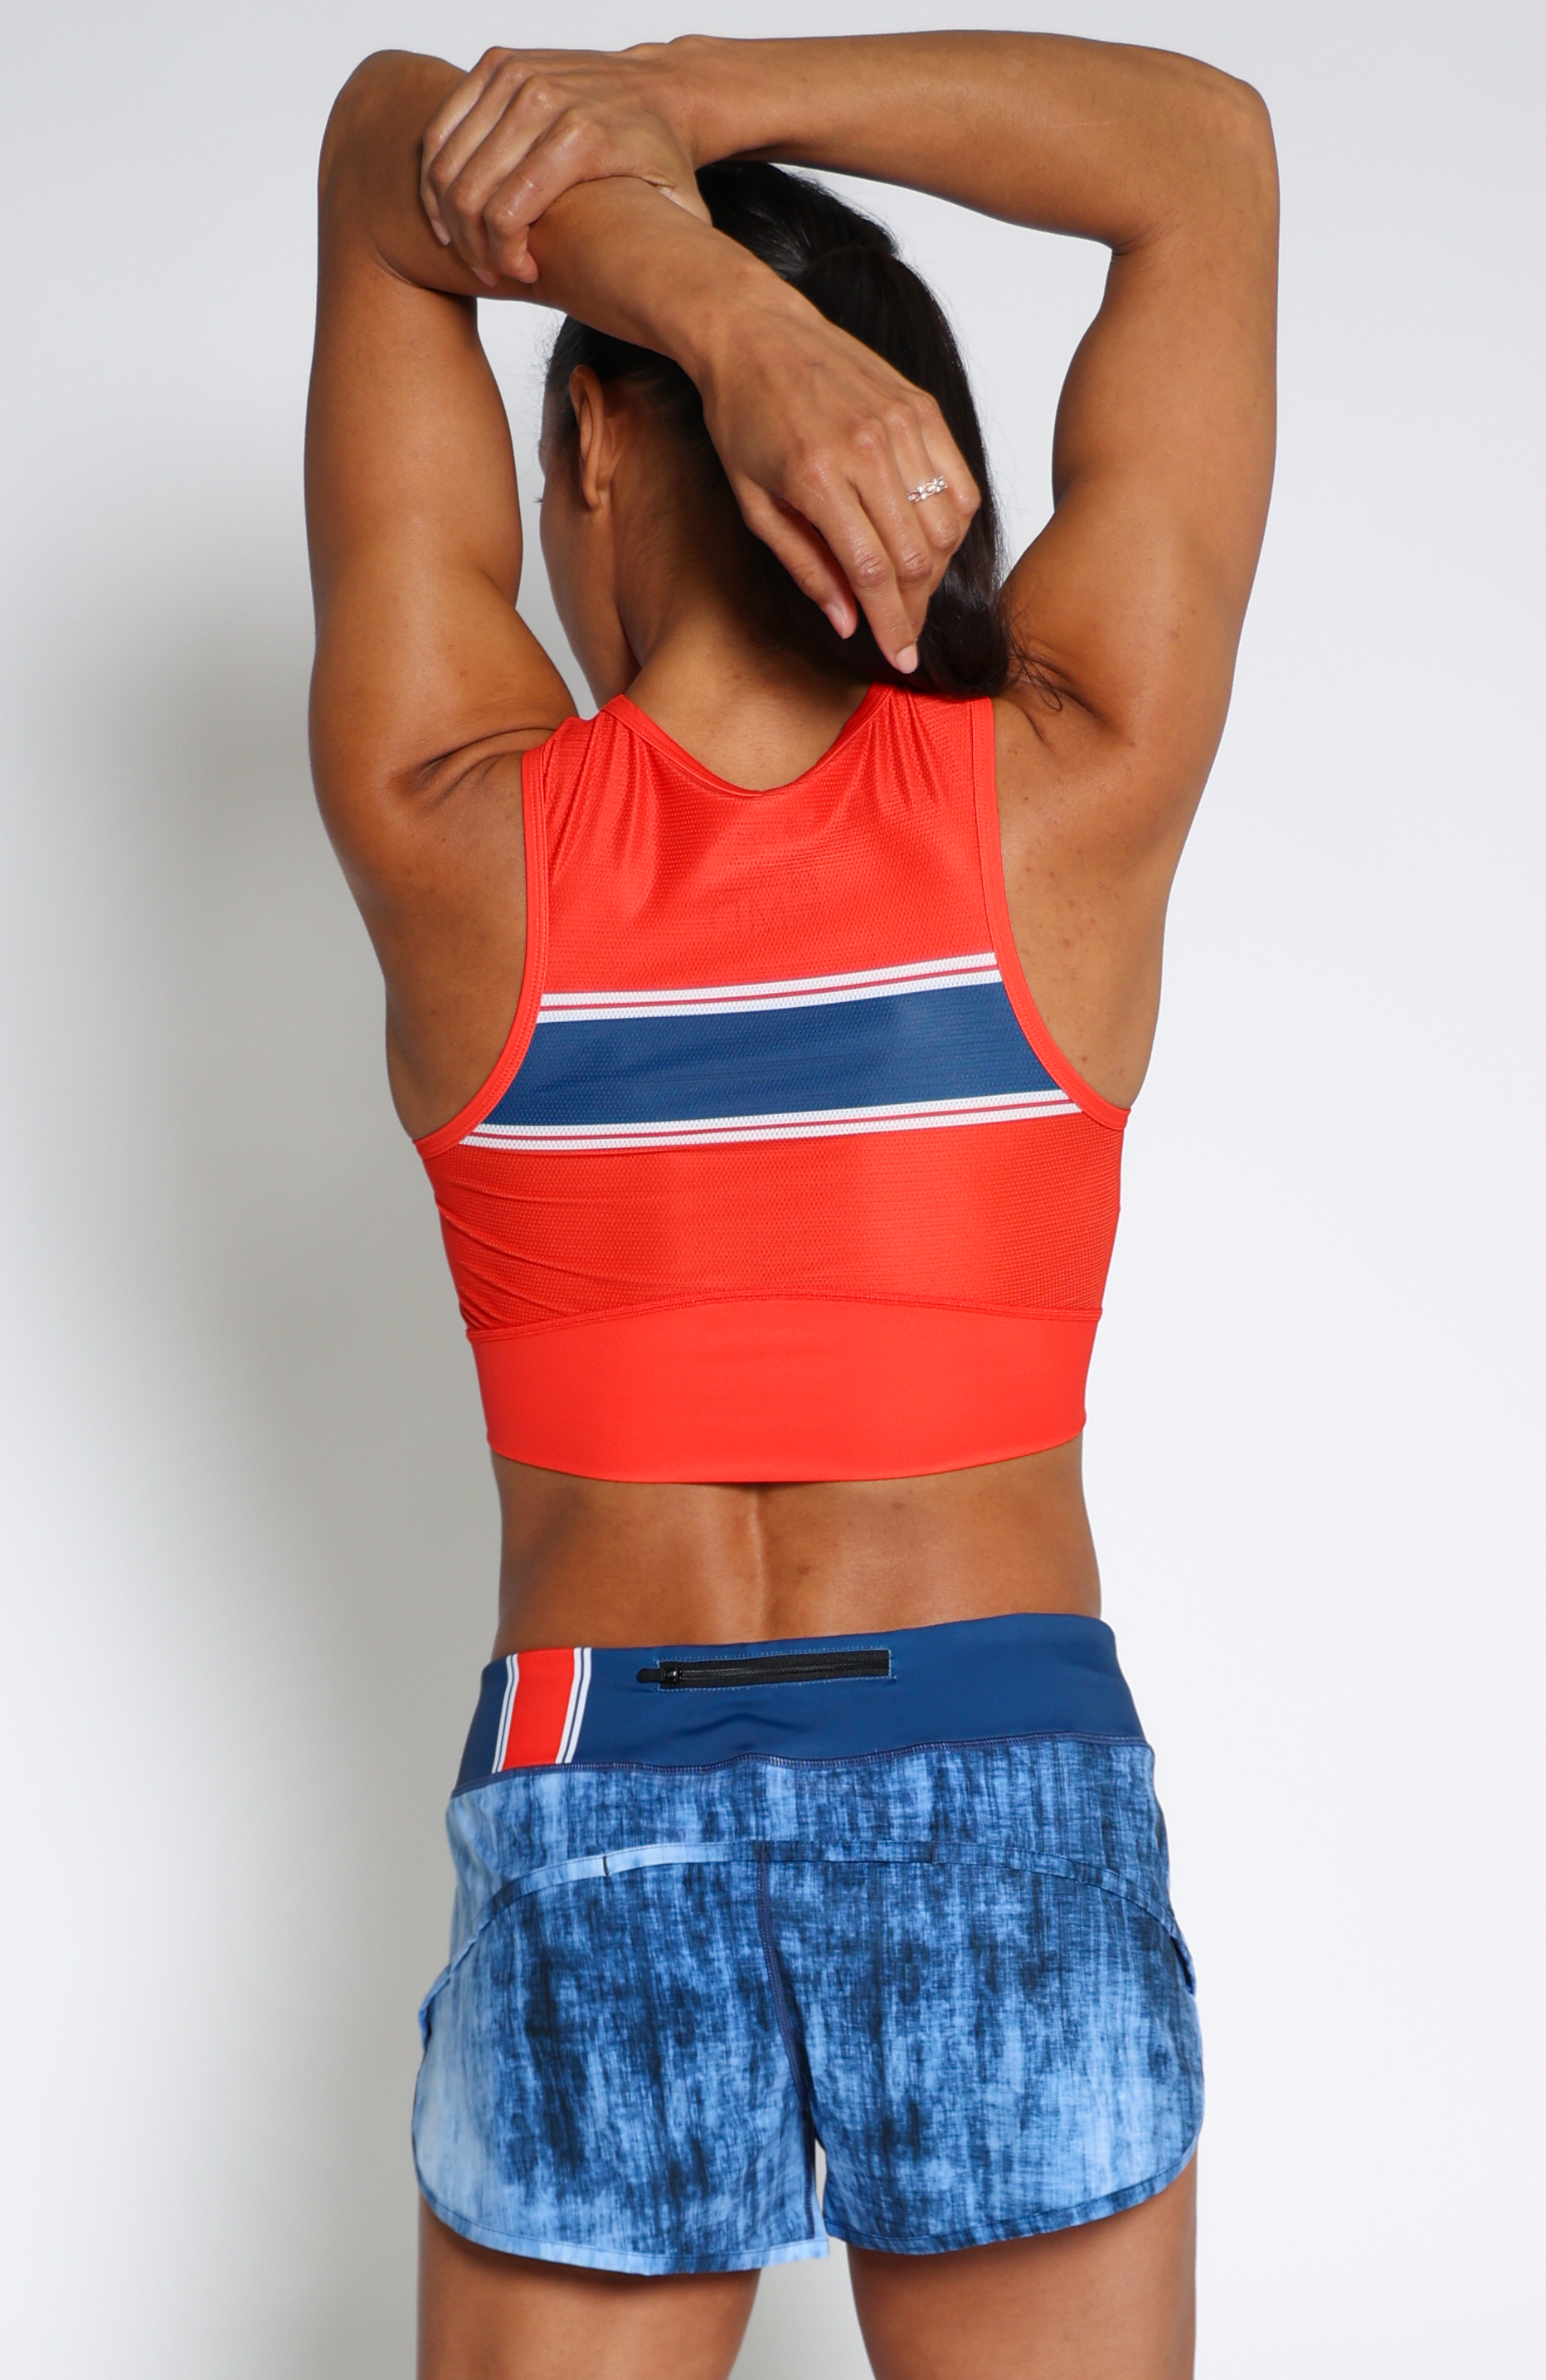 Sports Bra for Different Breast Types You Must Kno